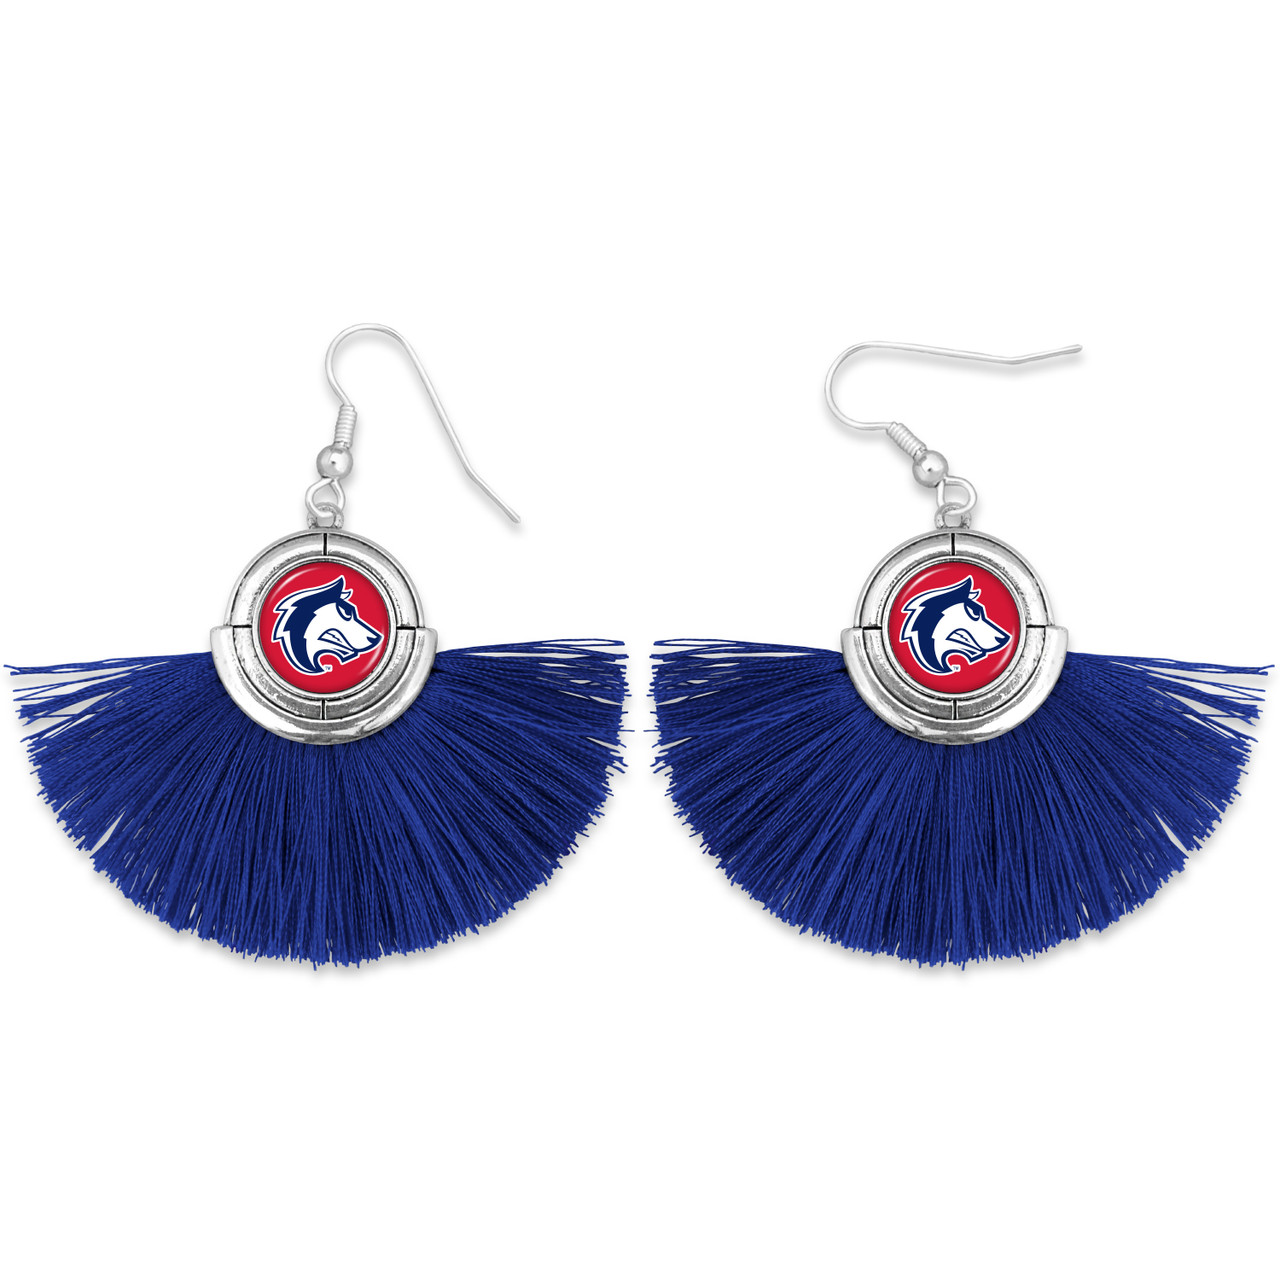 Colorado State Pueblo Thunderwolves Earrings- No Strings Attached